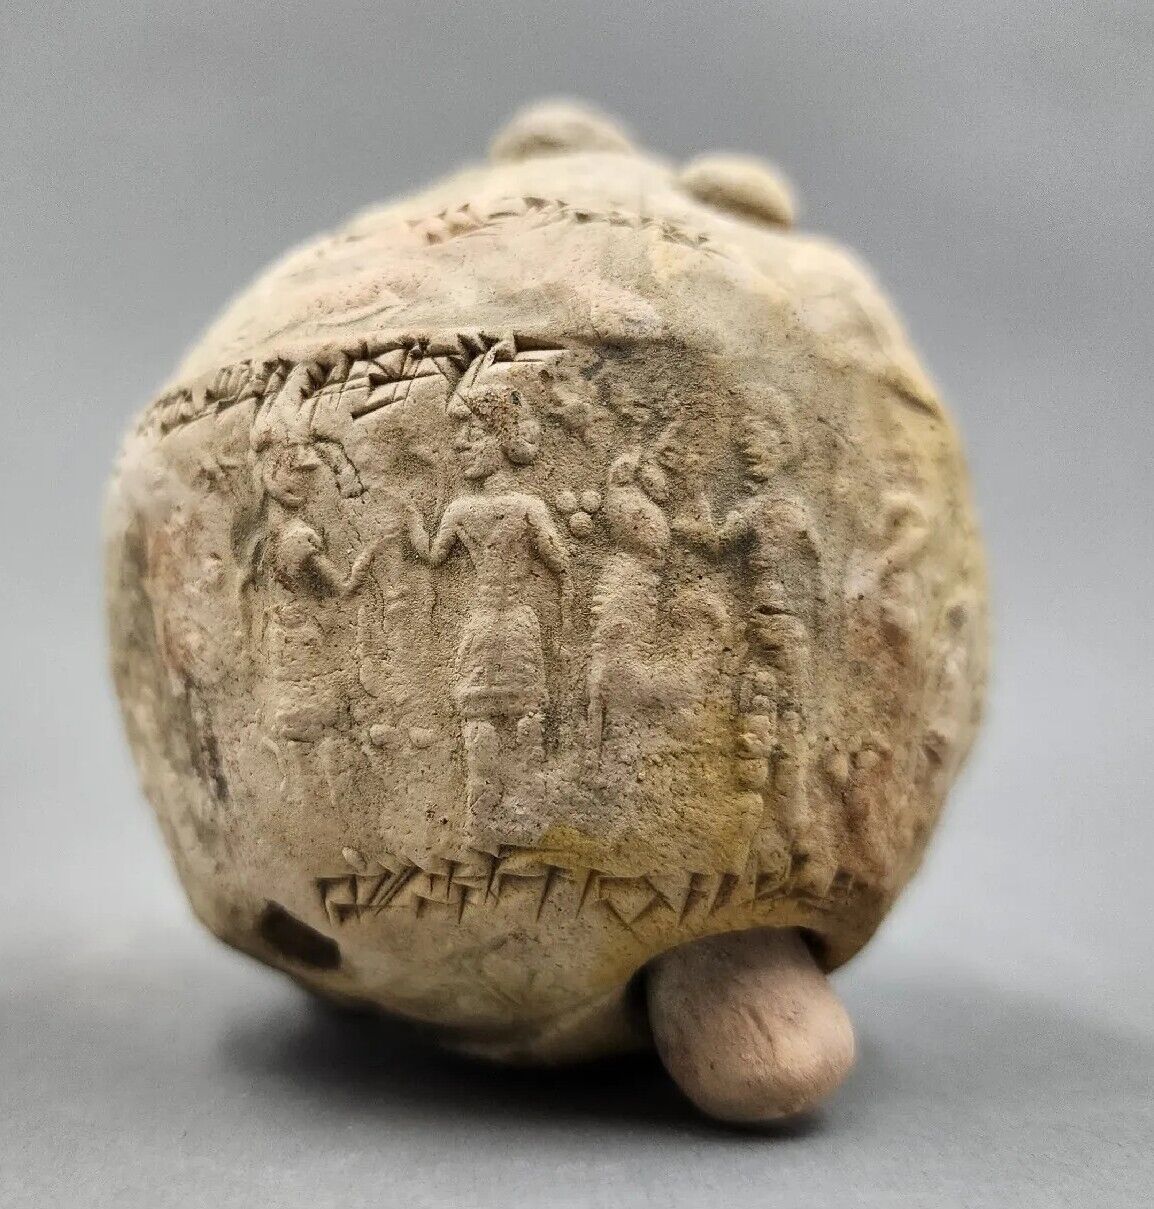 CIRCA NEAR EASTERN CUNEIFORM CLAY BALL GAME WITH WRITINGS AND SEALS. IMPORTANT